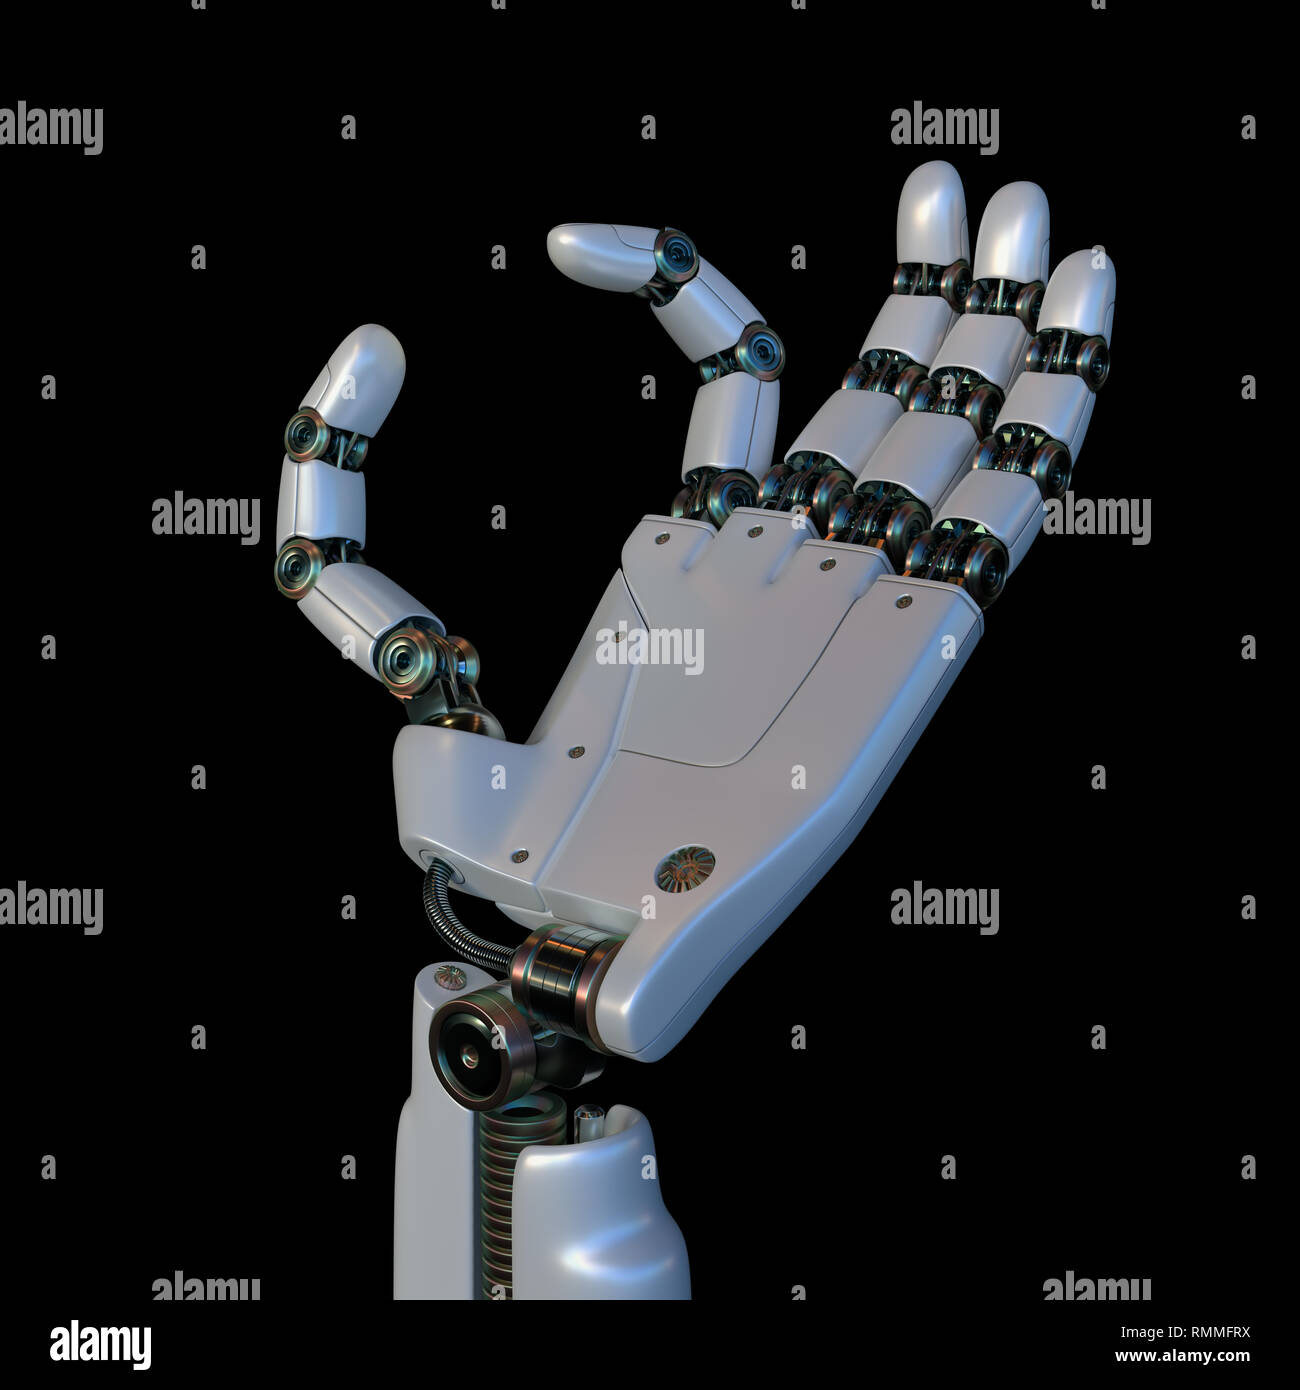 Robotic hand on black background. Your text or image between the robot's fingers. Stock Photo